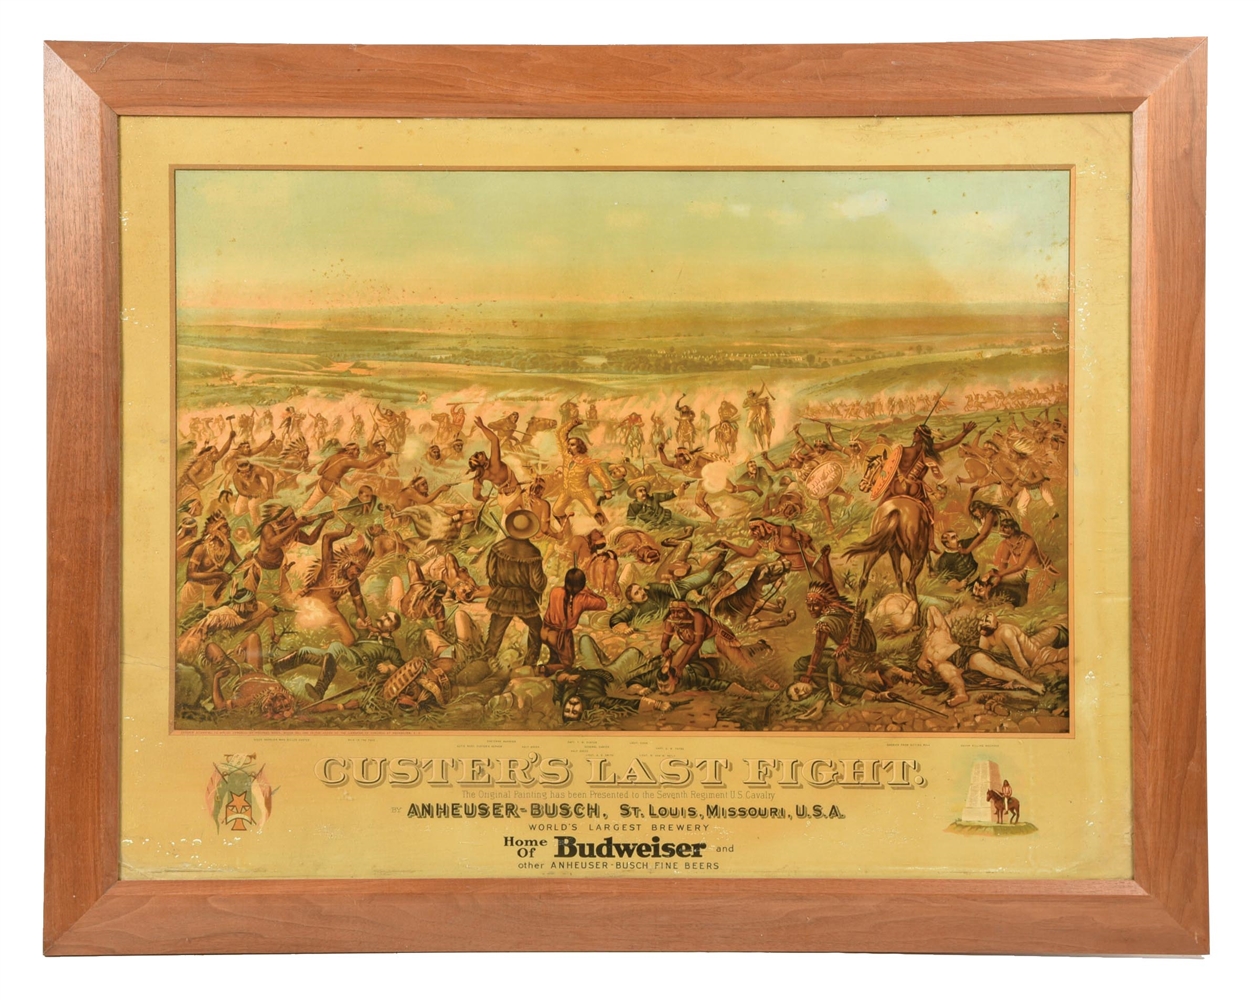 ANHEUSER-BUSCH "CUSTERS LAST FIGHT" CARDBOARD LITHOGRAPH W/ "CUSTERS LAST FIGHT" GRAPHIC.